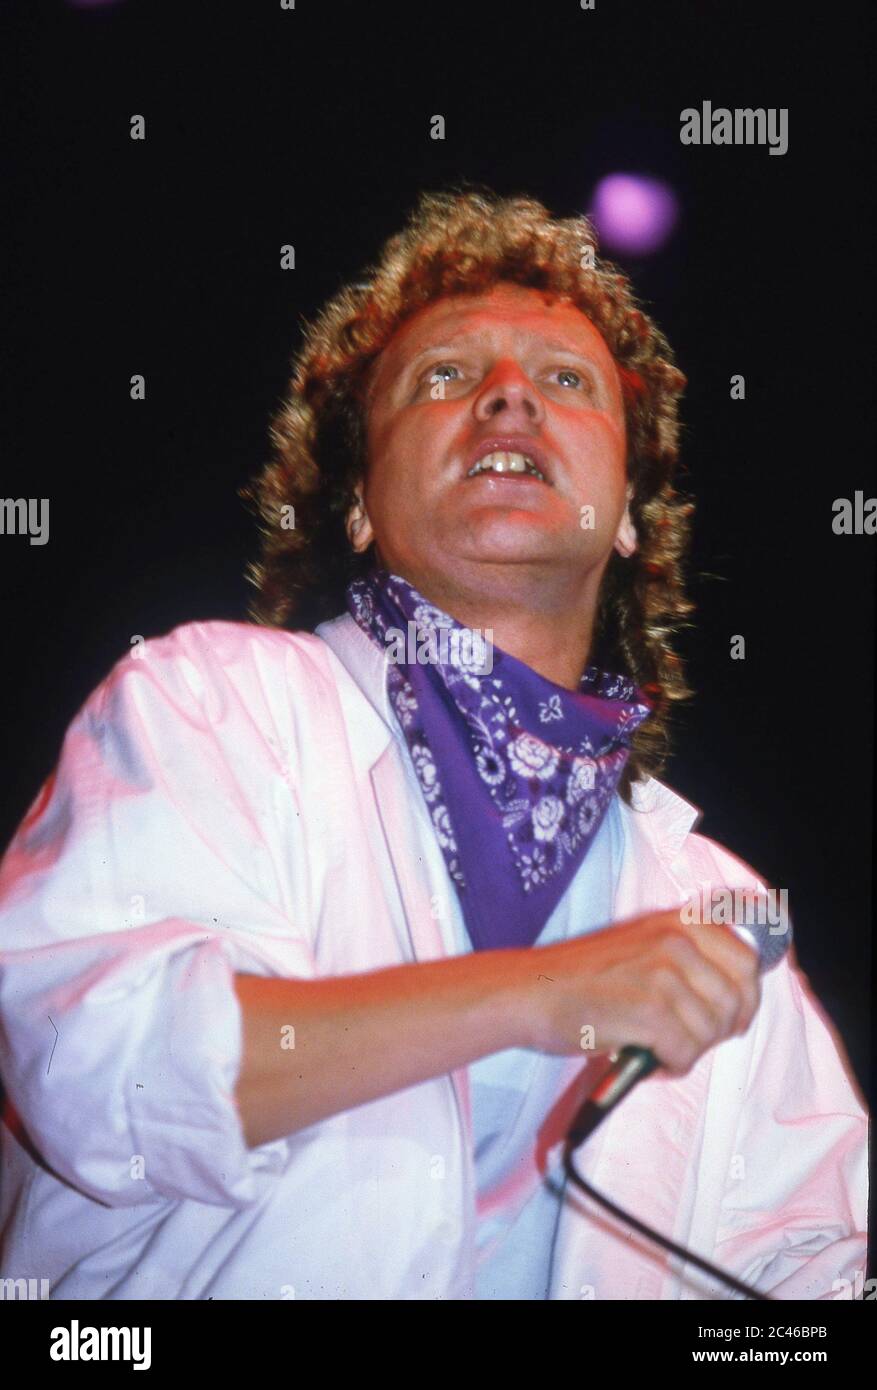 Foreigner on stage at Wembley Arena,London 1985: singer Lou Gramm Stock Photo